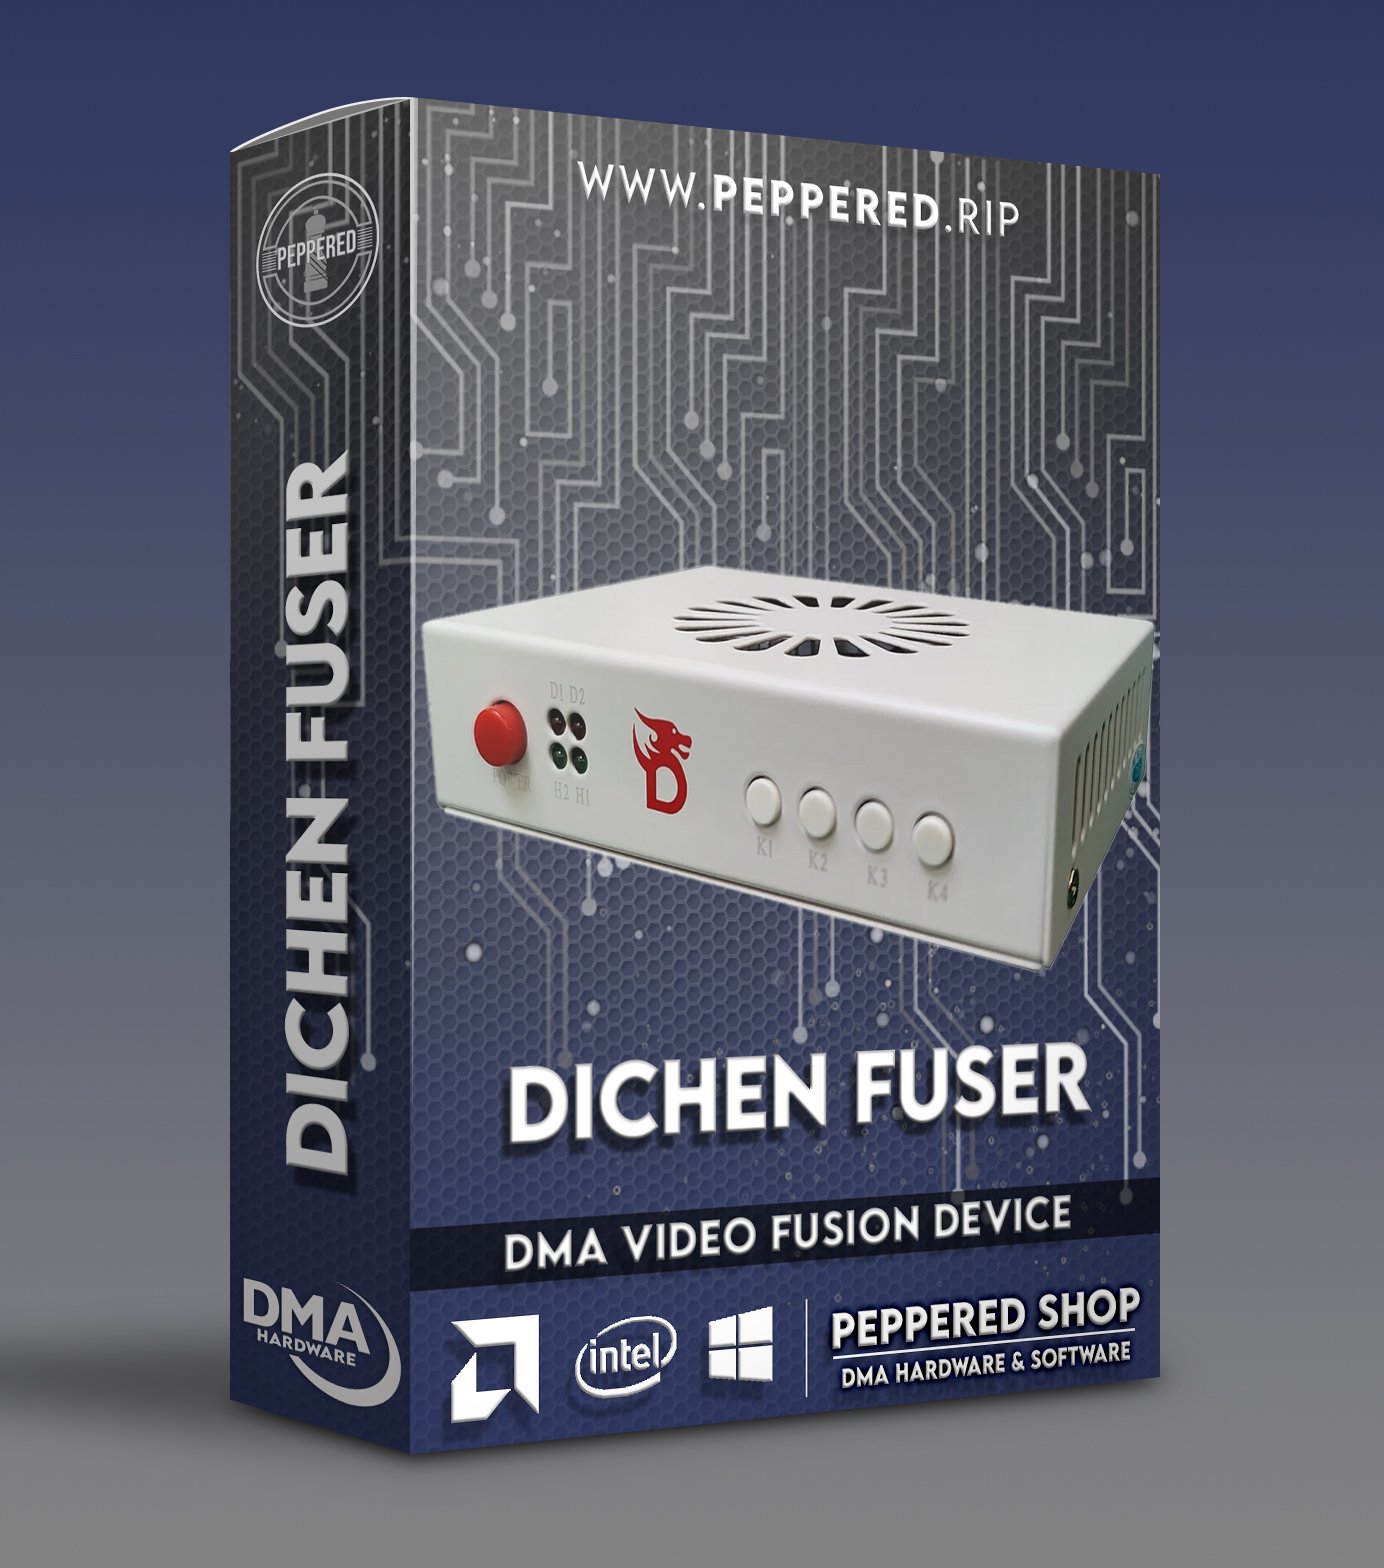 More information about "DICHEN FUSER"